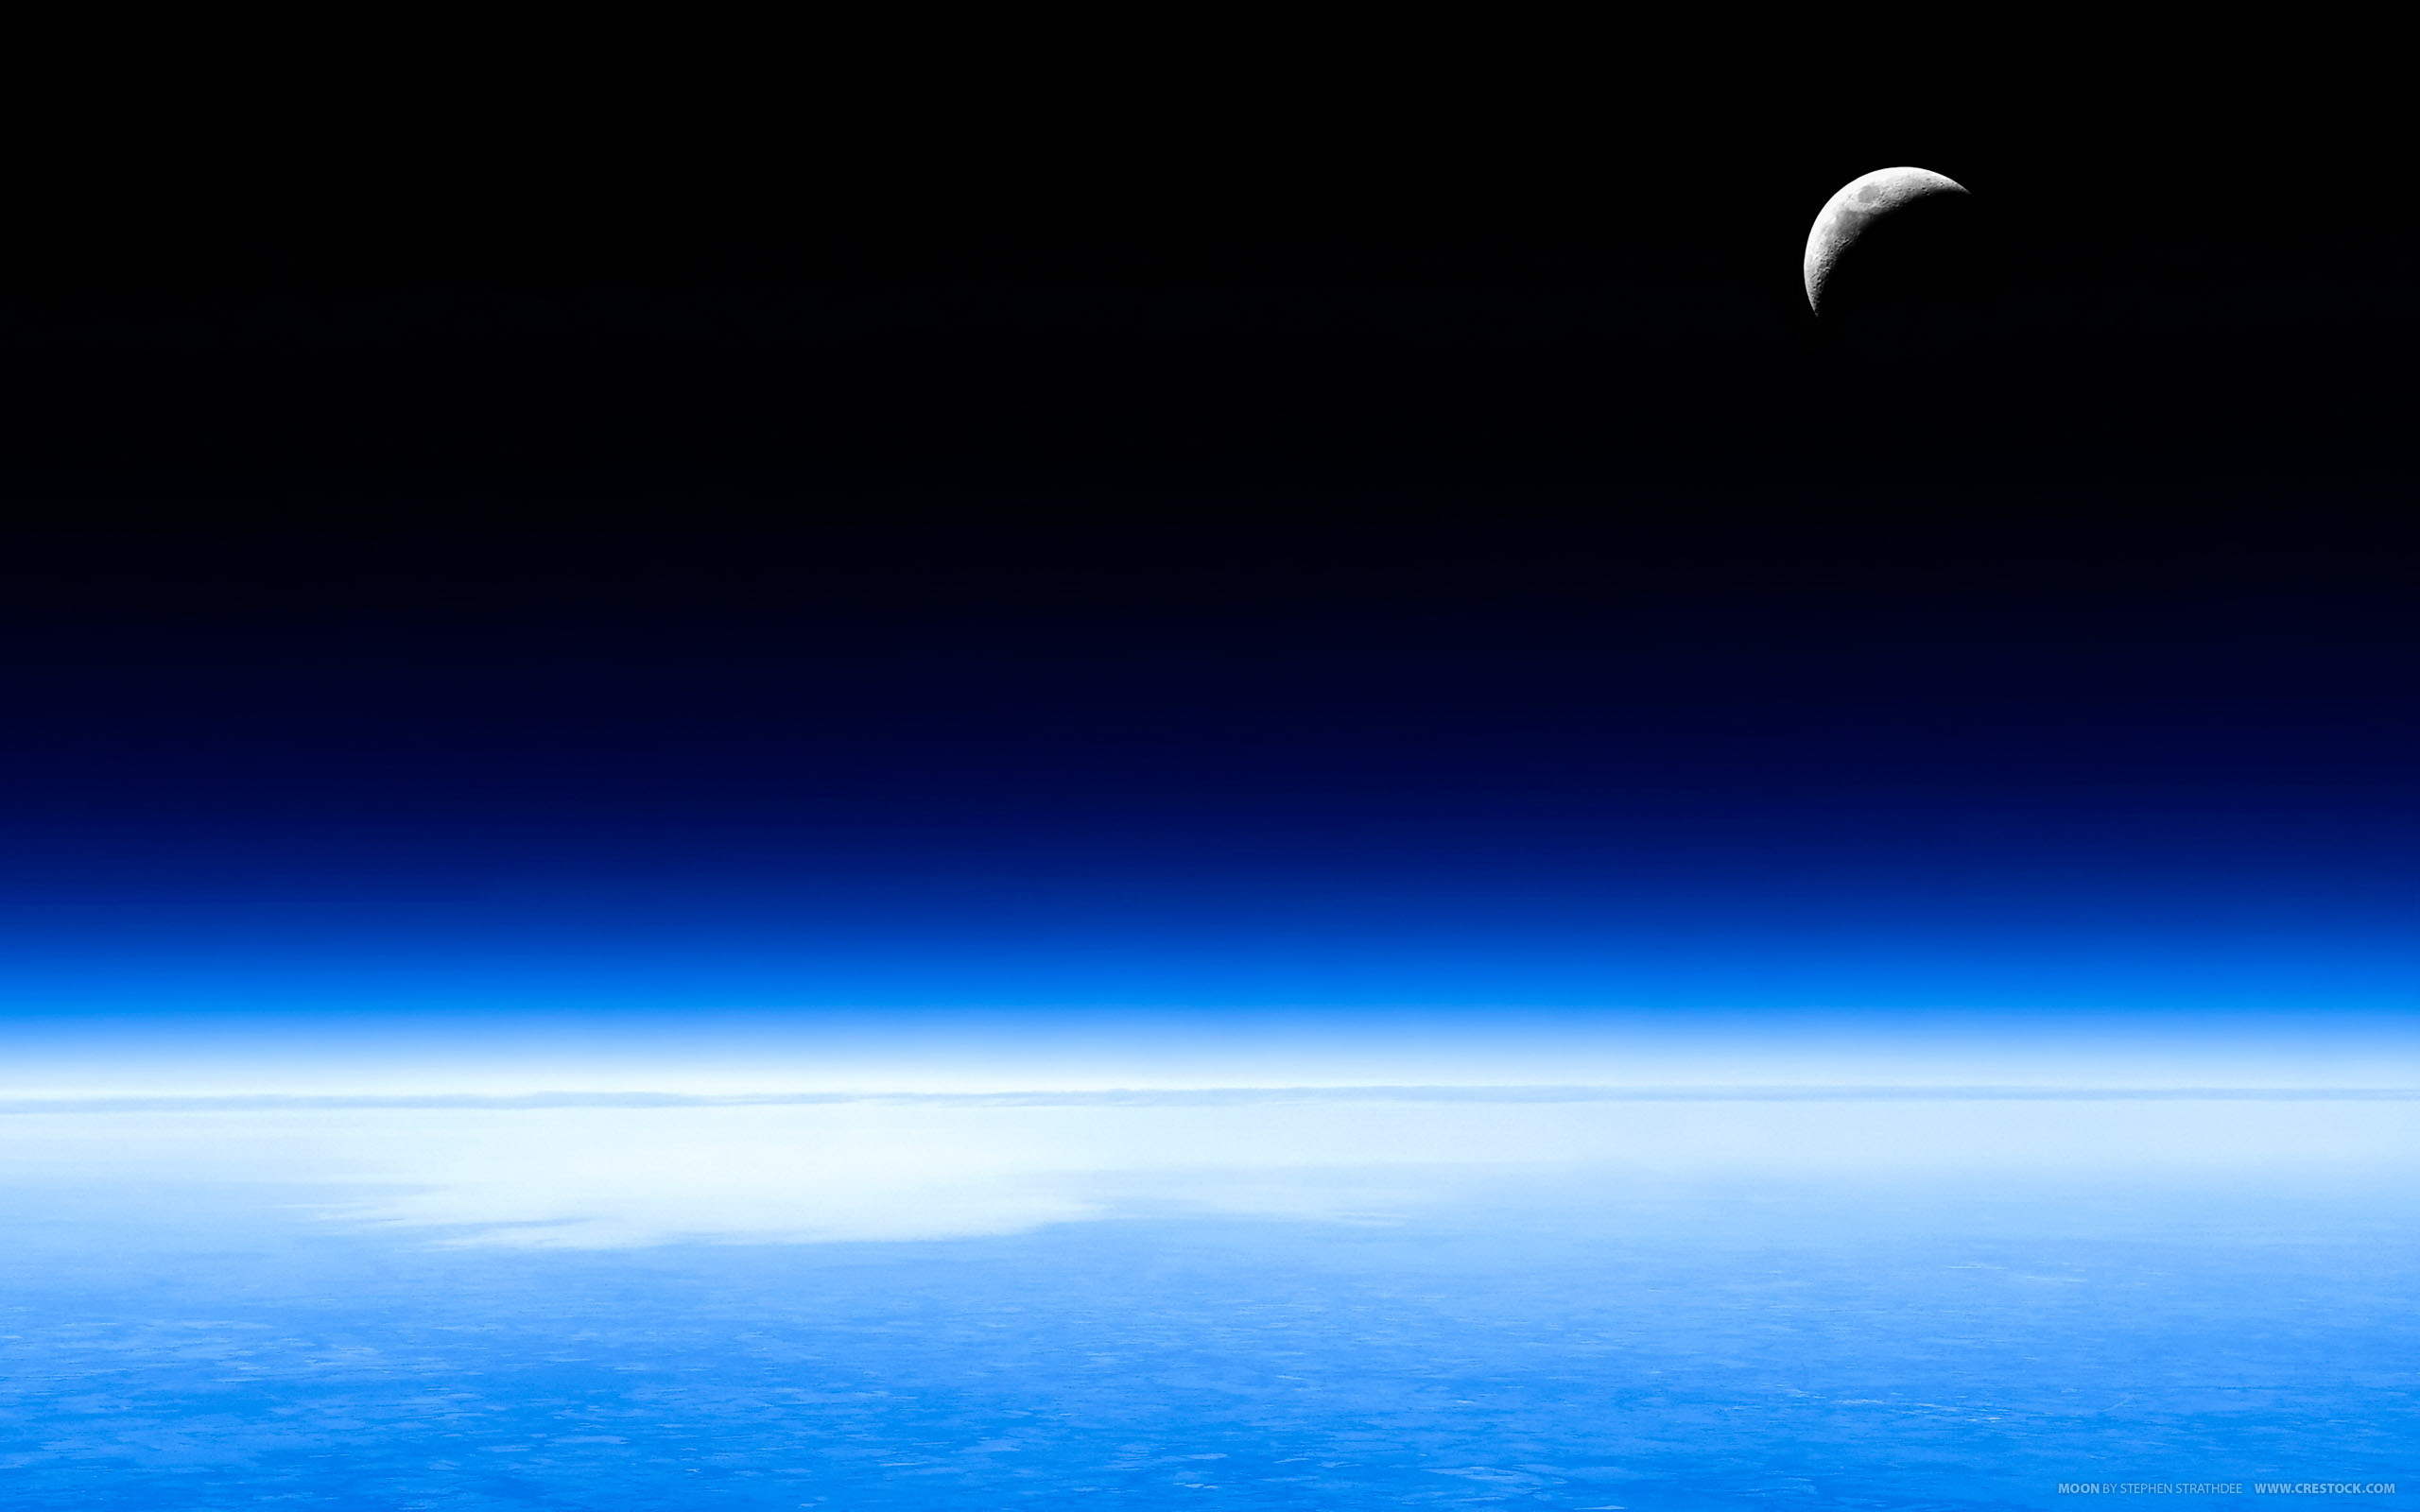 outer space, planets, Moon, Earth, skyscapes - desktop wallpaper